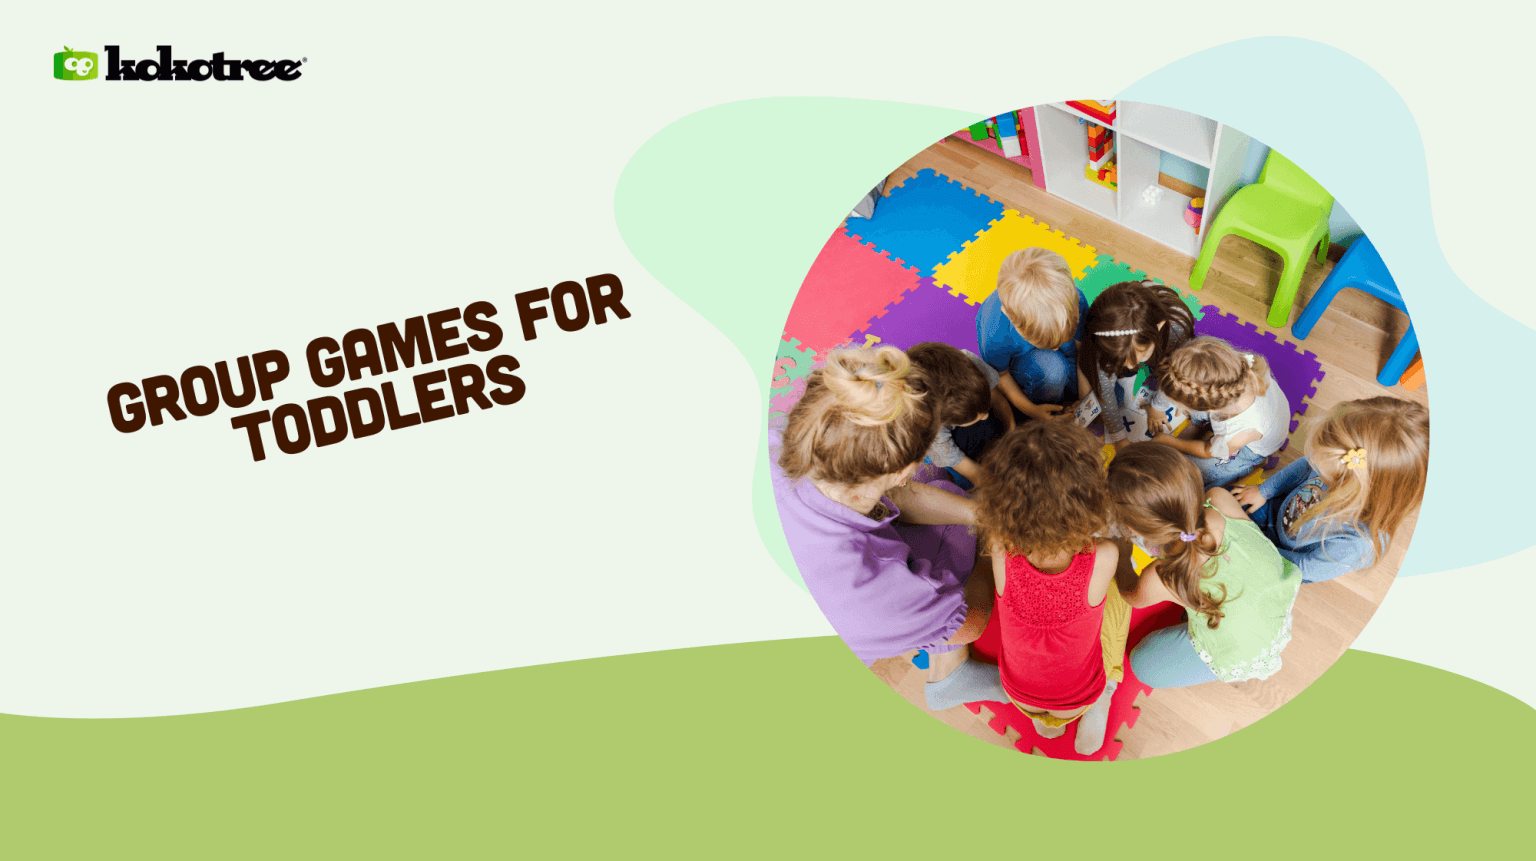 Group Games For Toddlers 1536x861 